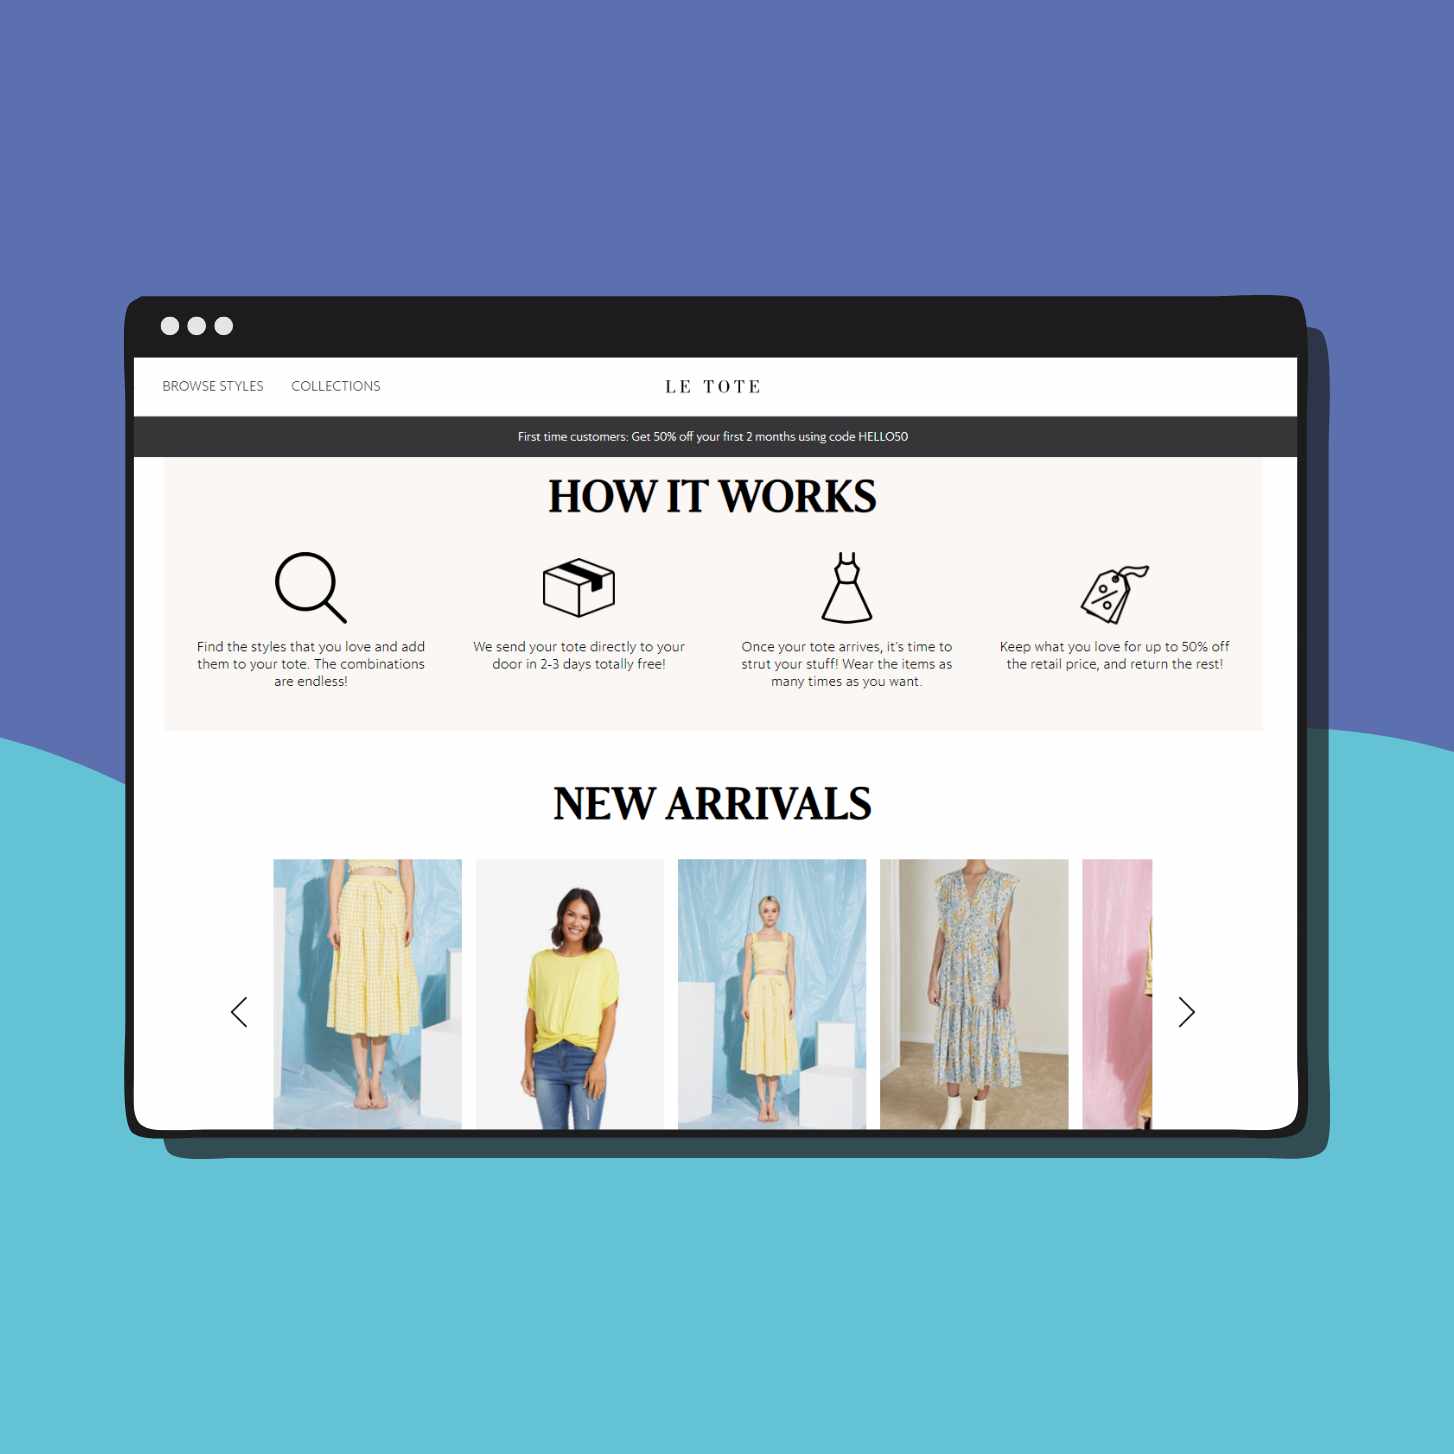 Le Lote's Homepage Showcasing Their New Arrivals and Explaining How The Website Works